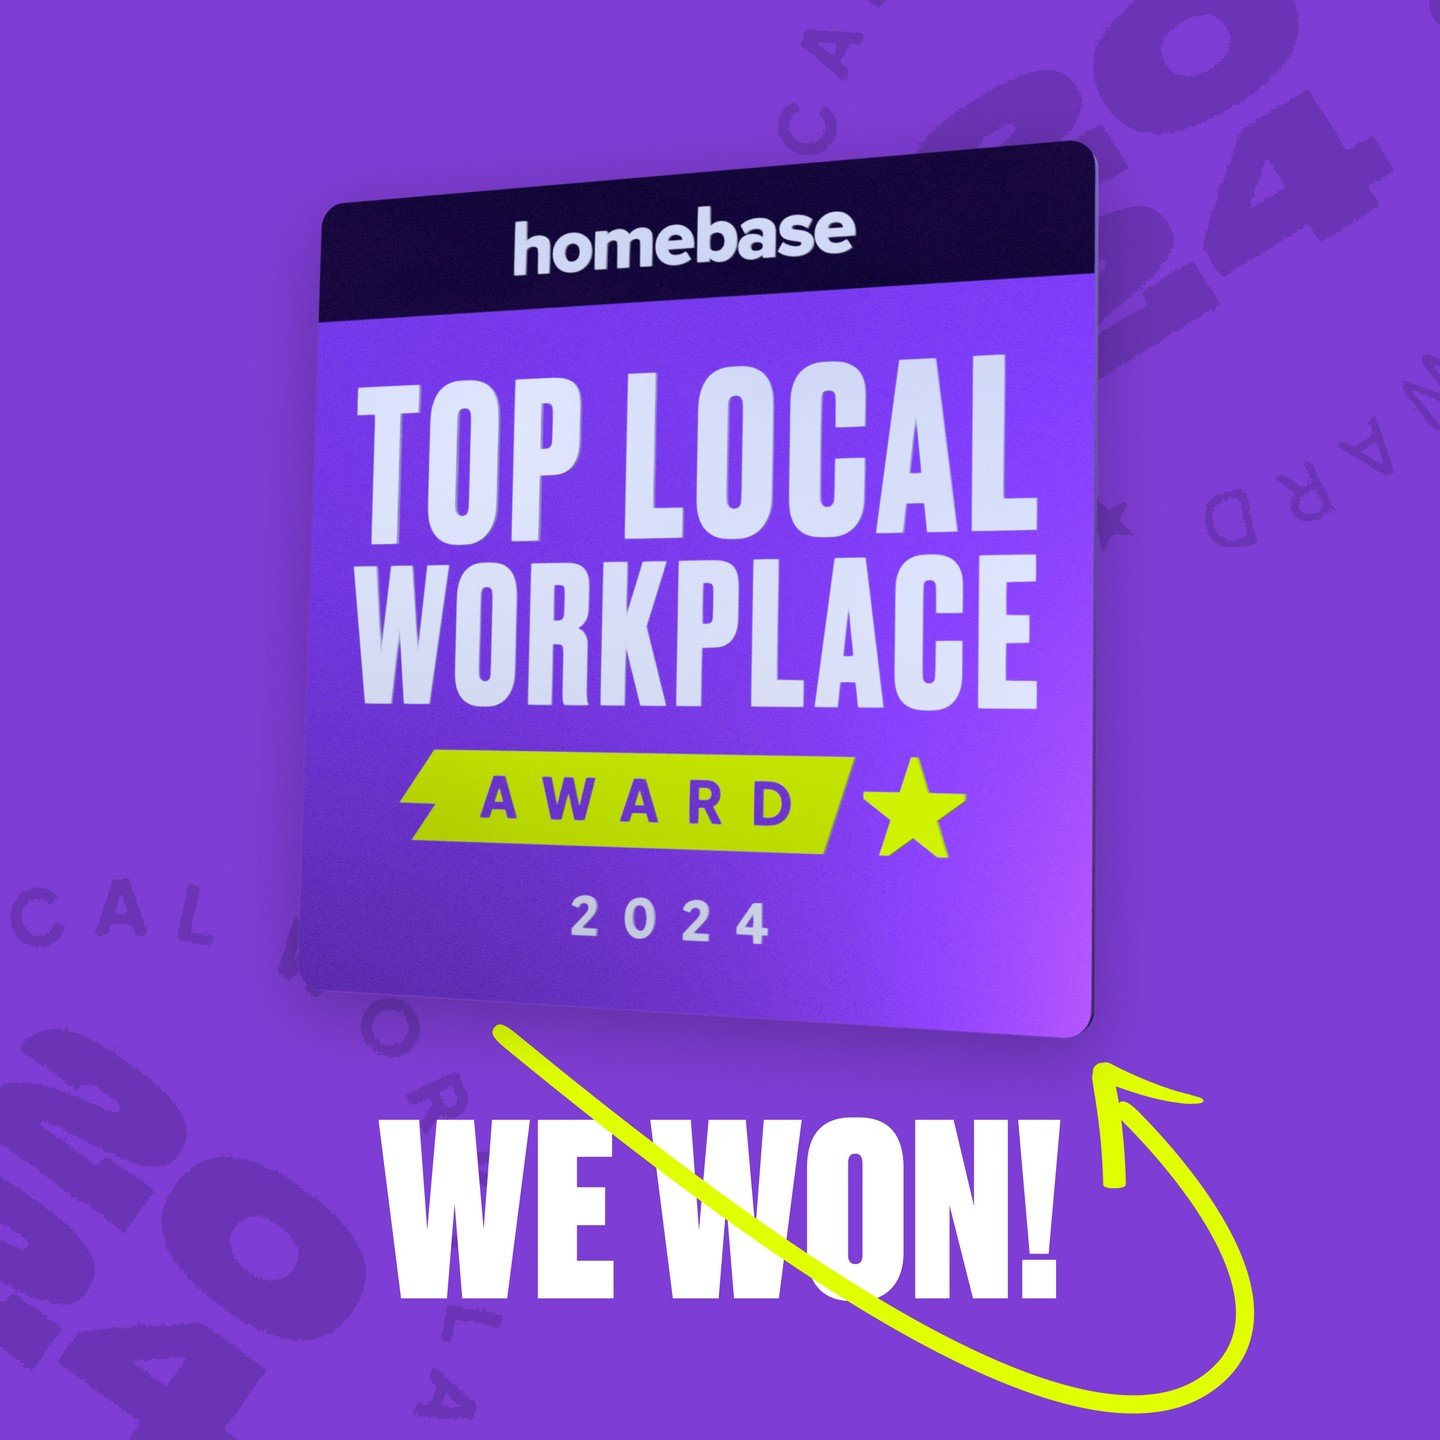 👏National Small Business Week👏
feels like the perfect time to share that we&rsquo;re winners of the @homebase Top Local Workplace Award. Congrats
to our fellow small businesses on this
well-earned win. #Homebaseawards
#shopsmall #smallbiz #hustle
#